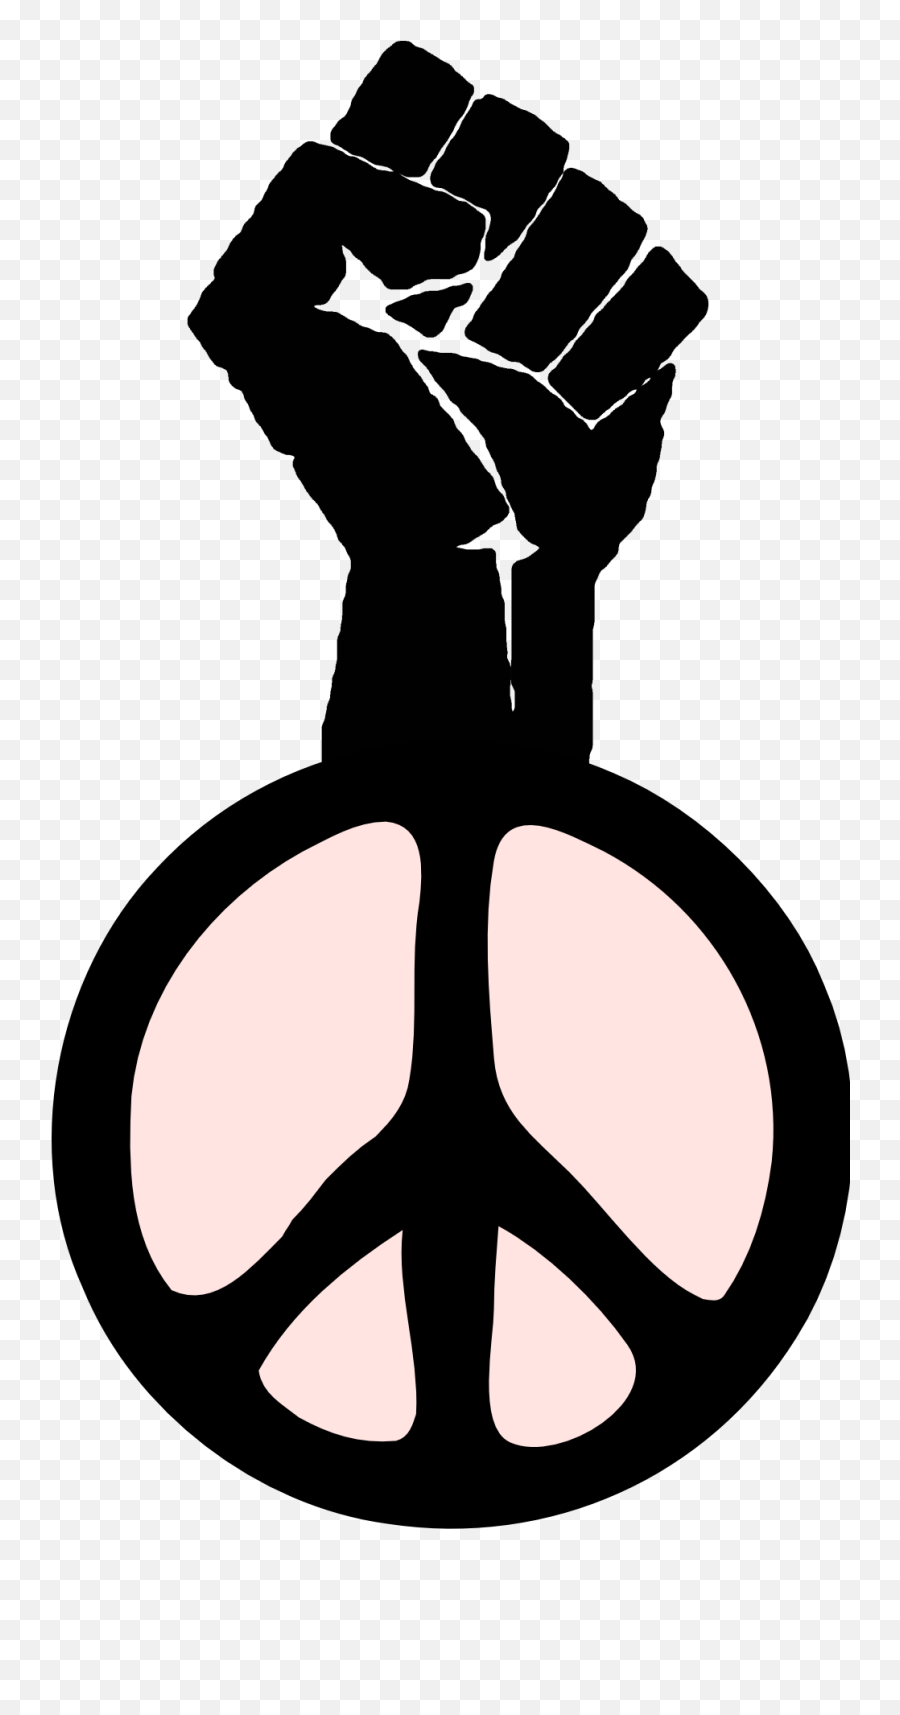 Closed Fist Symbol Drawing Free Image - Black Lives Matter Fist With Peace Sign Emoji,Shaking Fist Emoticon Facebook